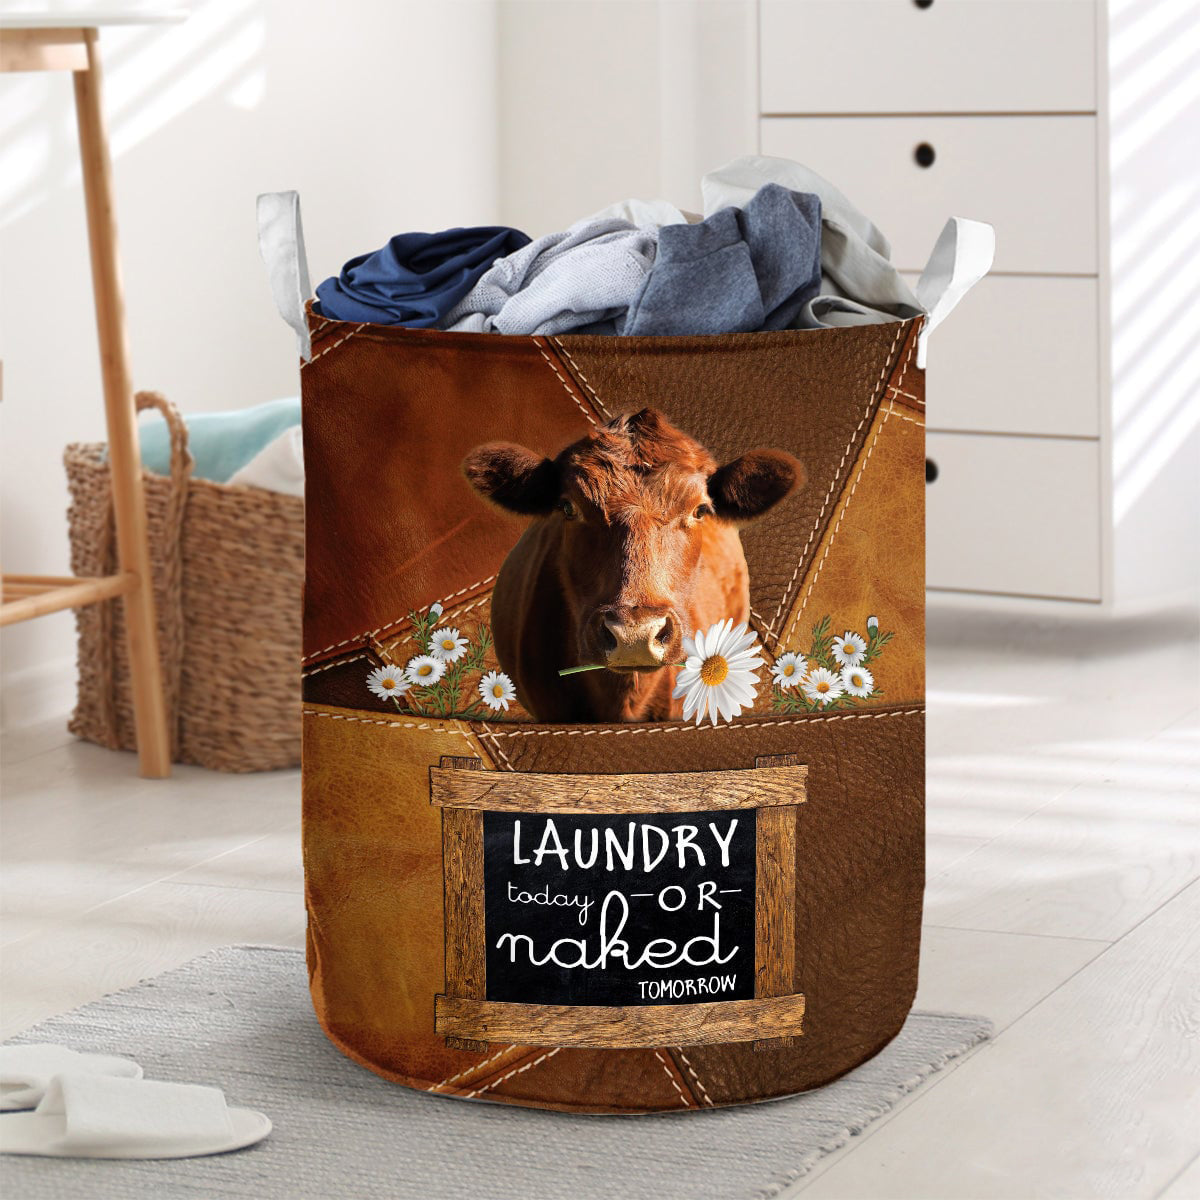 Red angus-laundry today or naked tomorrow laundry basket